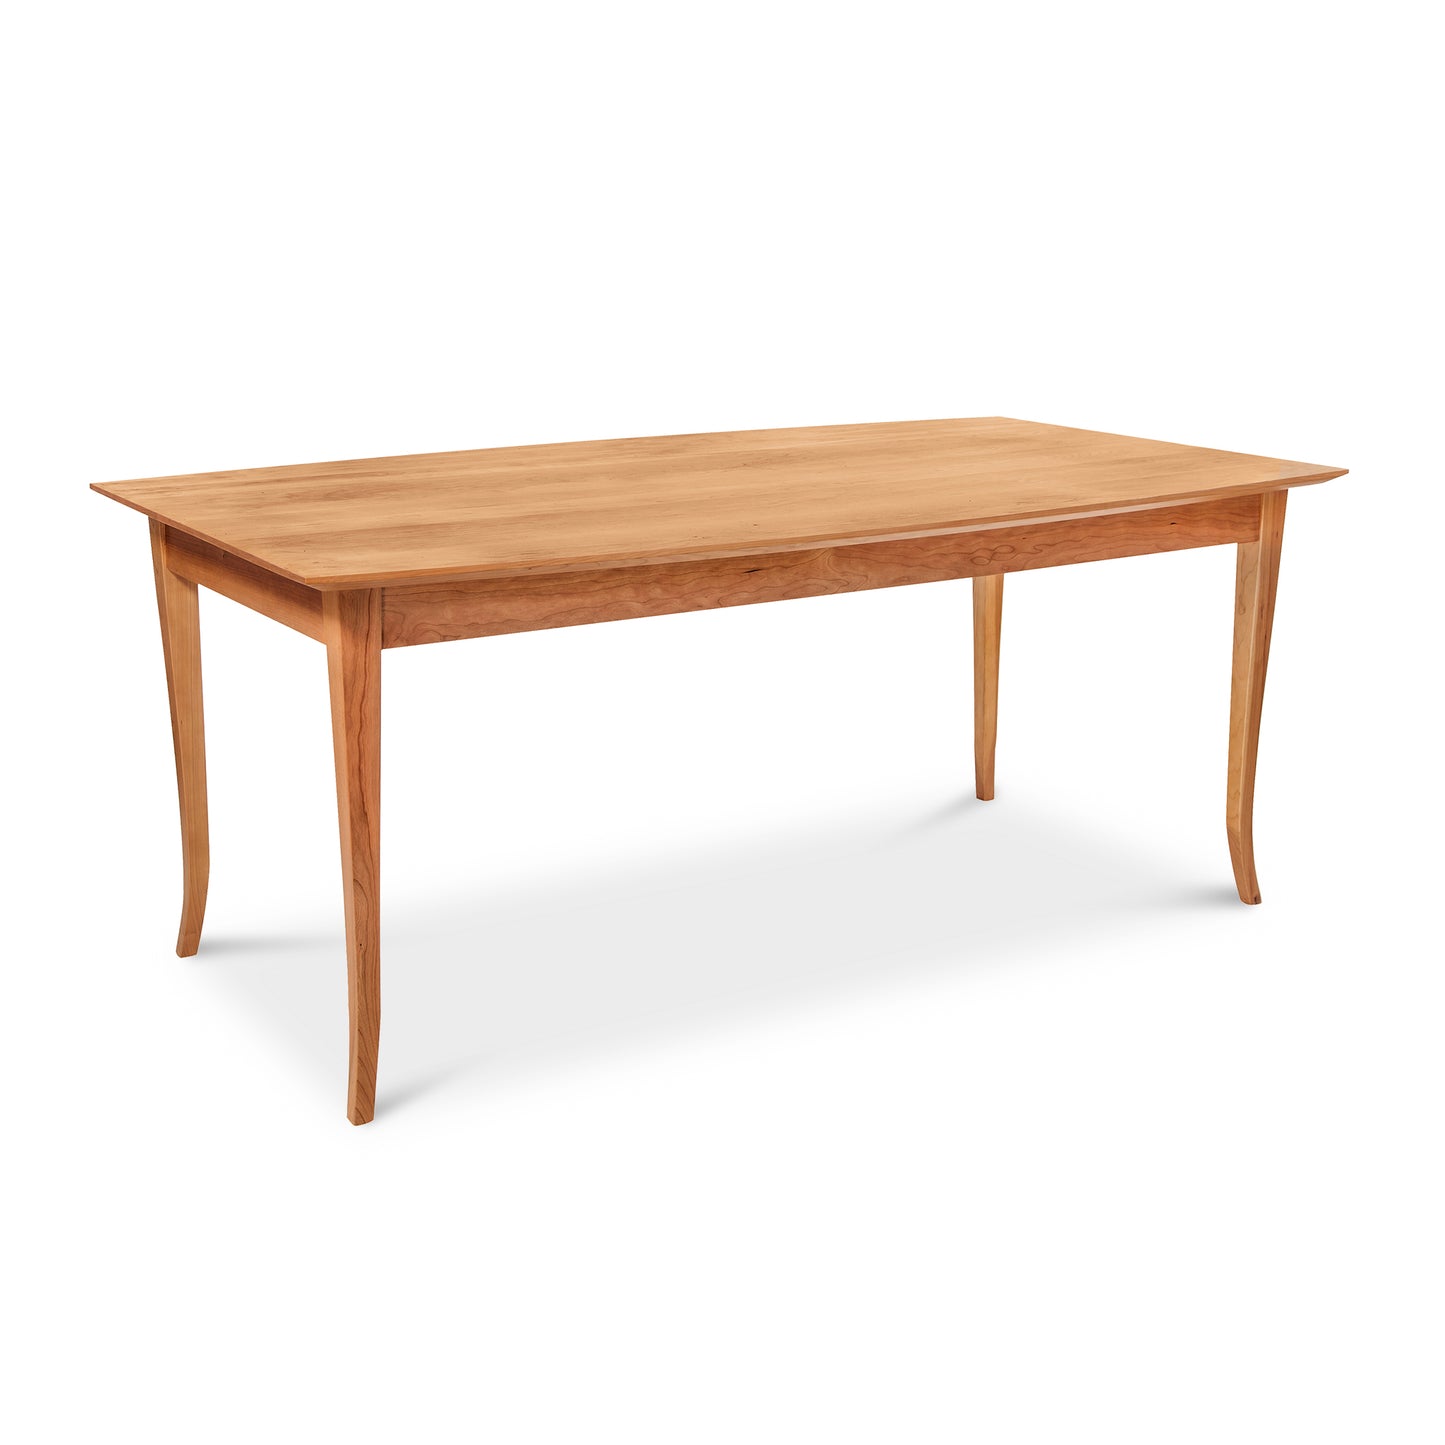 A Classic Shaker Flare Leg Solid Boat Top Table by Lyndon Furniture with a wooden top and flare legs.